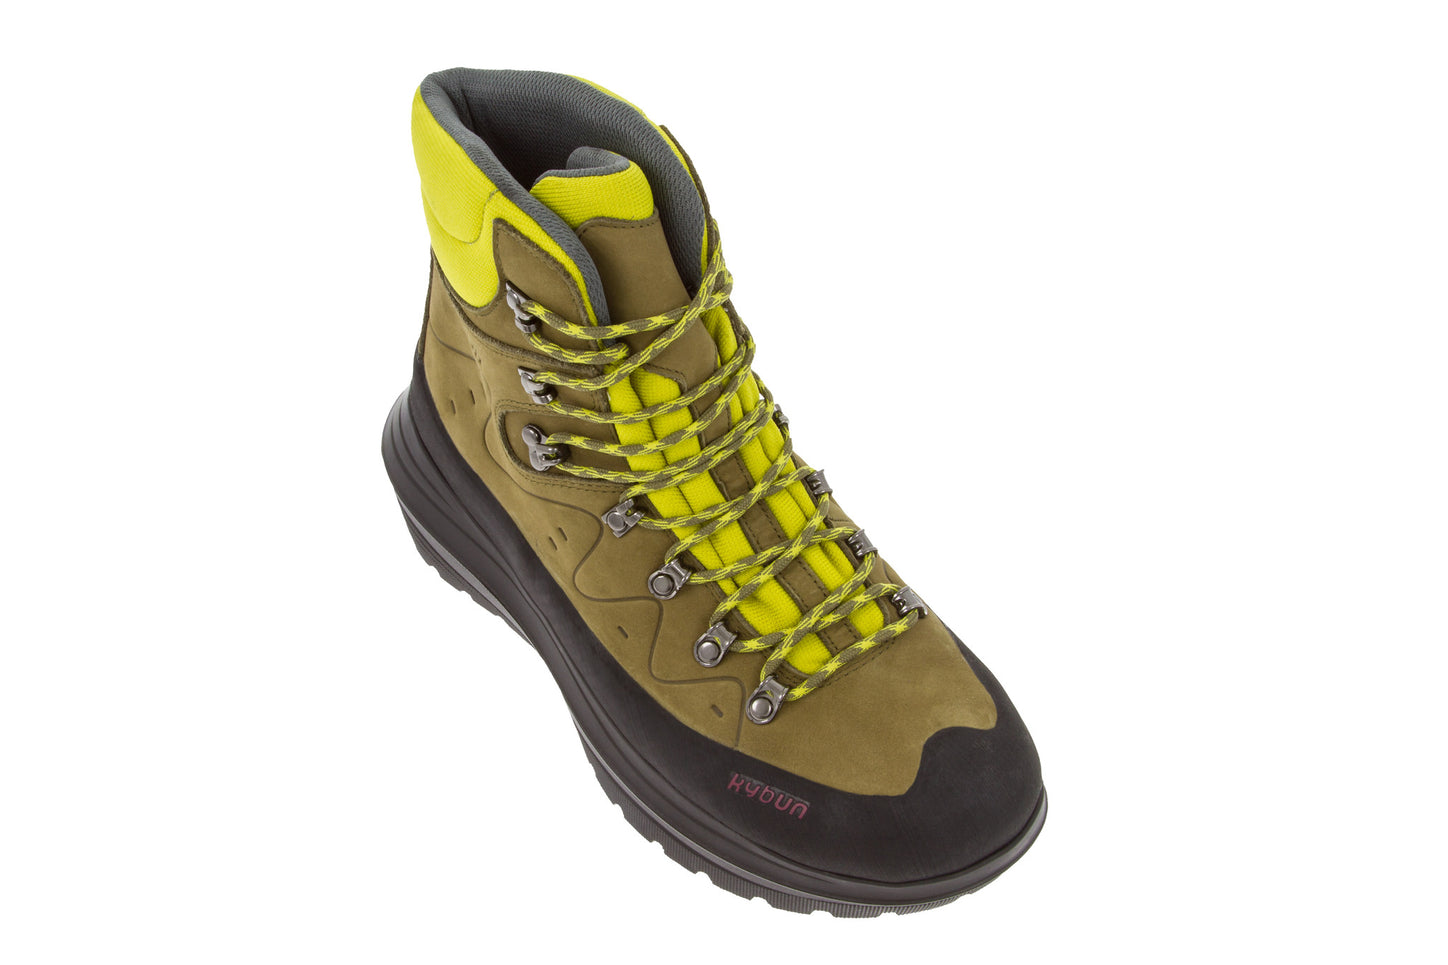 The new kyBoot outdoor sole is here!